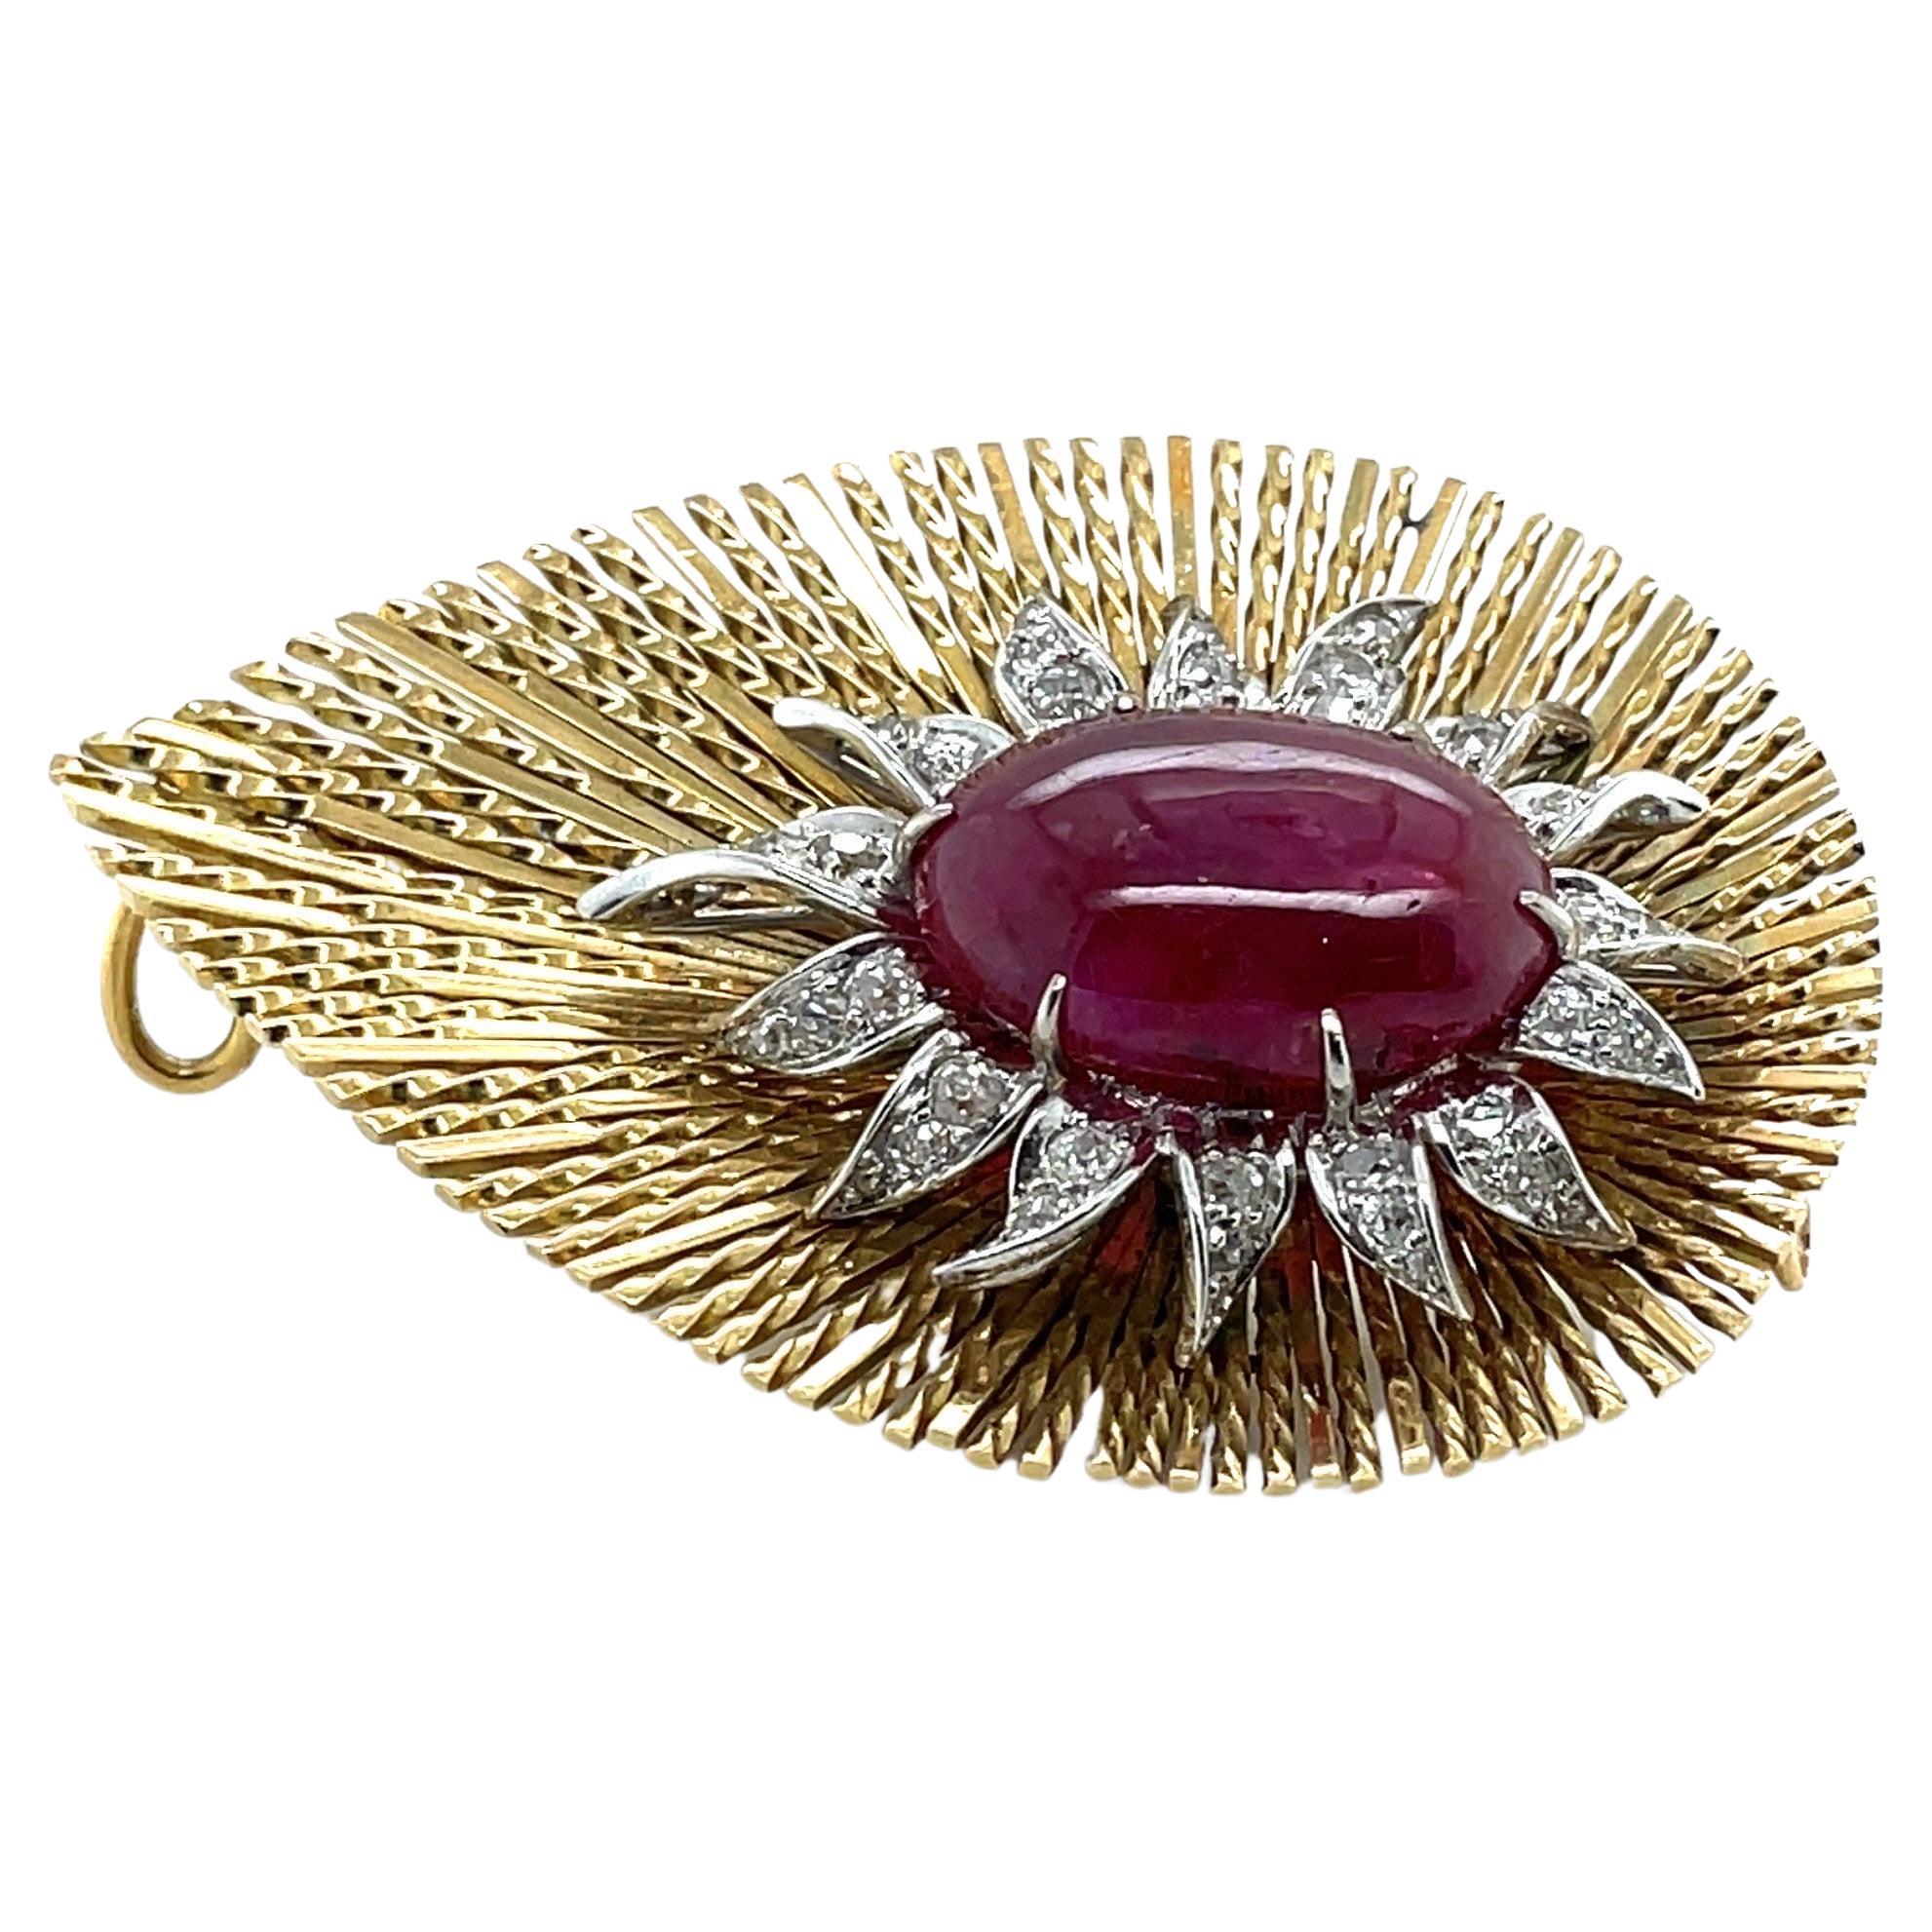 Ravishing 18 karat yellow gold, platinum, ruby and diamond brooch, by Sterlé, Paris, circa 1950s 

Delightful, drop-shaped clip brooch/pendant, composed of twisted and polished 18 karat gold wire, centering upon a stylised flower motif, set with 1